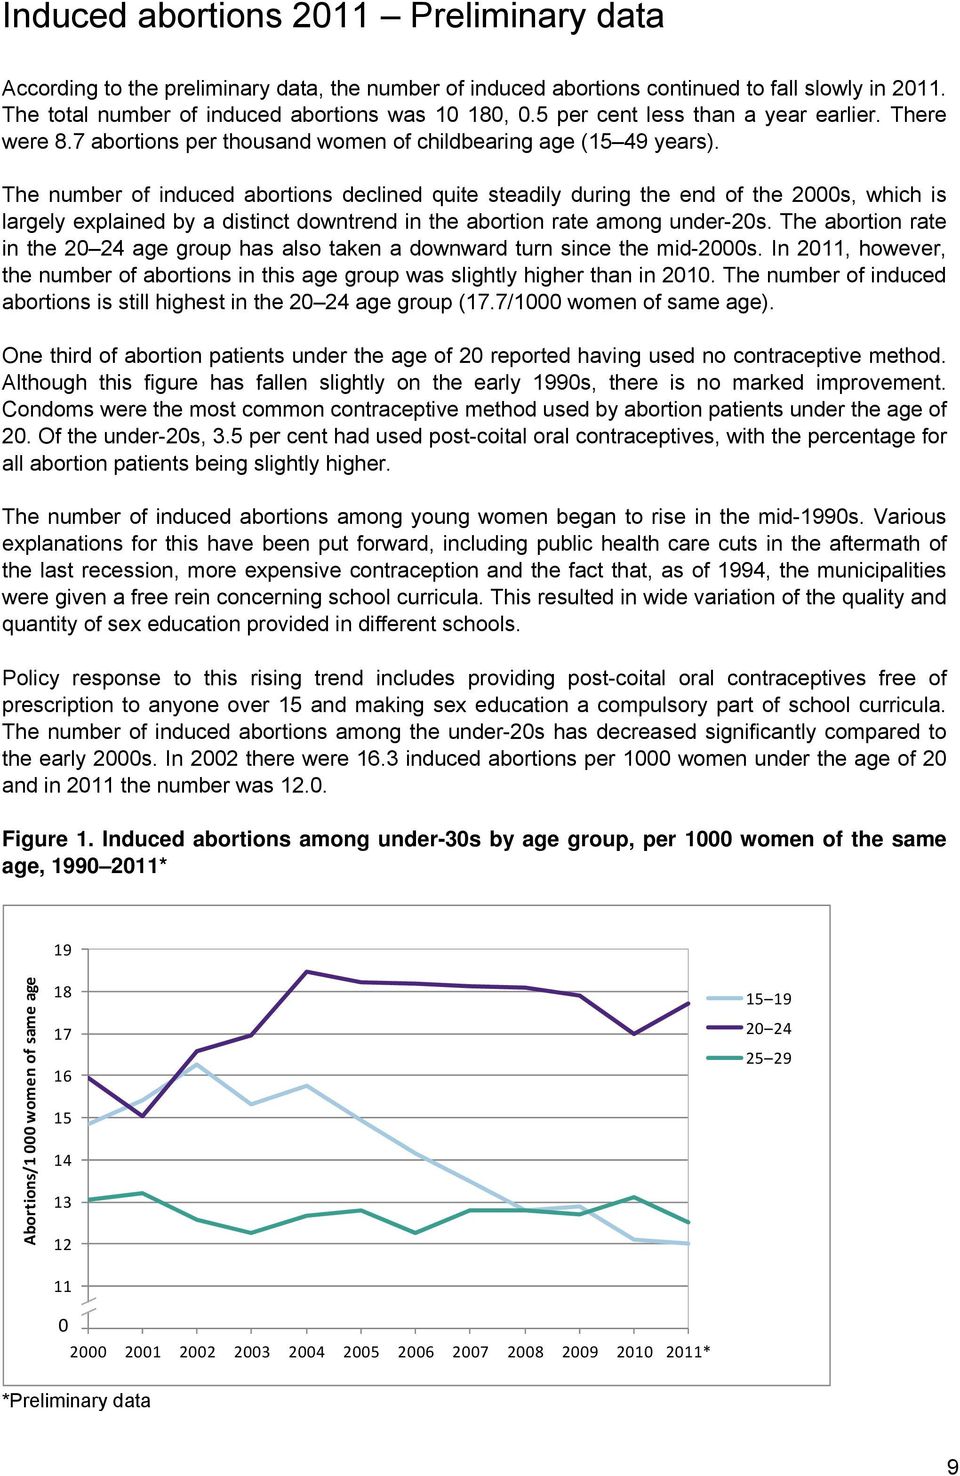 The number of induced abortions declined quite steadily during the end of the 2000s, which is largely explained by a distinct downtrend in the abortion rate among under-20s.